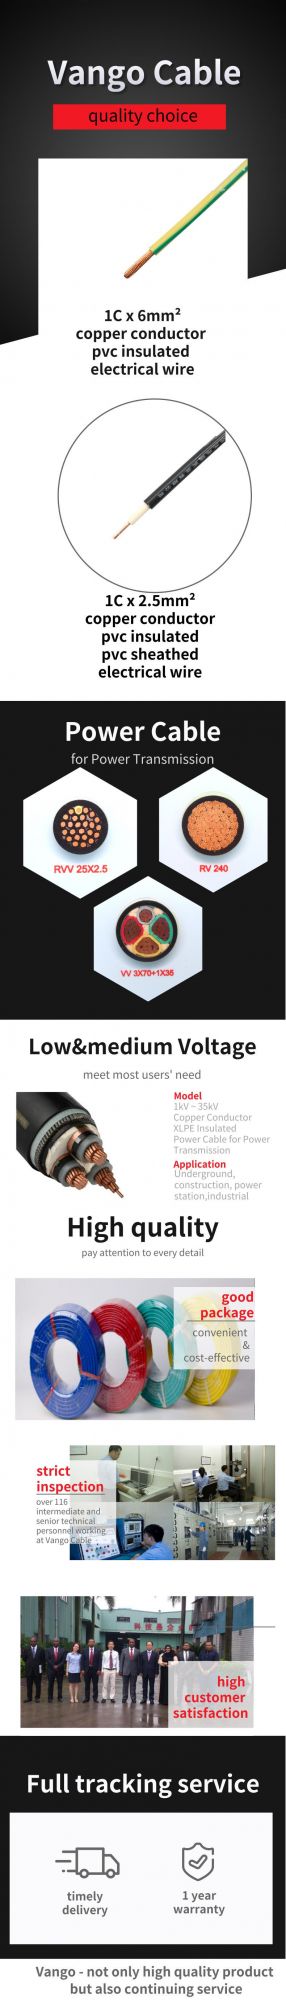 450/750V, 300/500V, 300/300V Electric Wire with Copper Conductor and PVC Insulation.